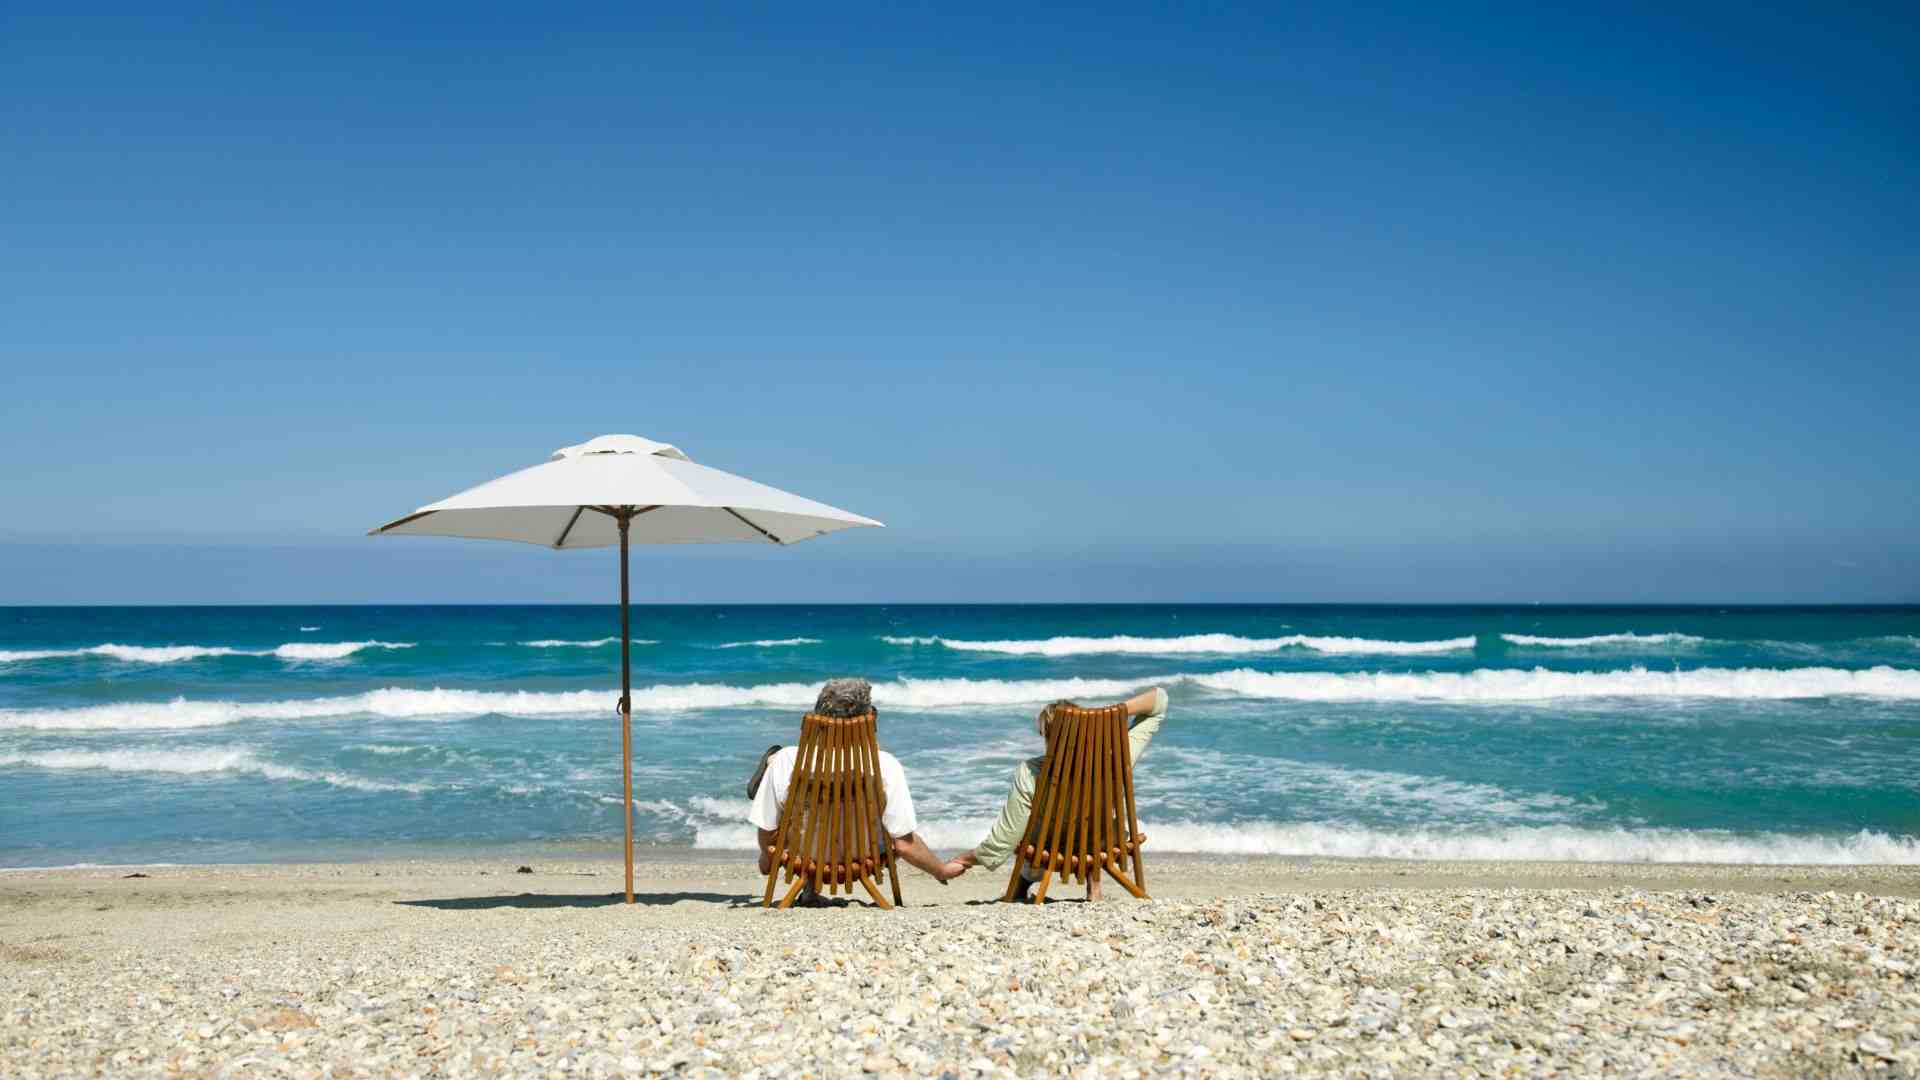 A retired couple sitting beside an umbrella on wooden chairs, shot on a sandy beach with calm waves and a cloudless sky.